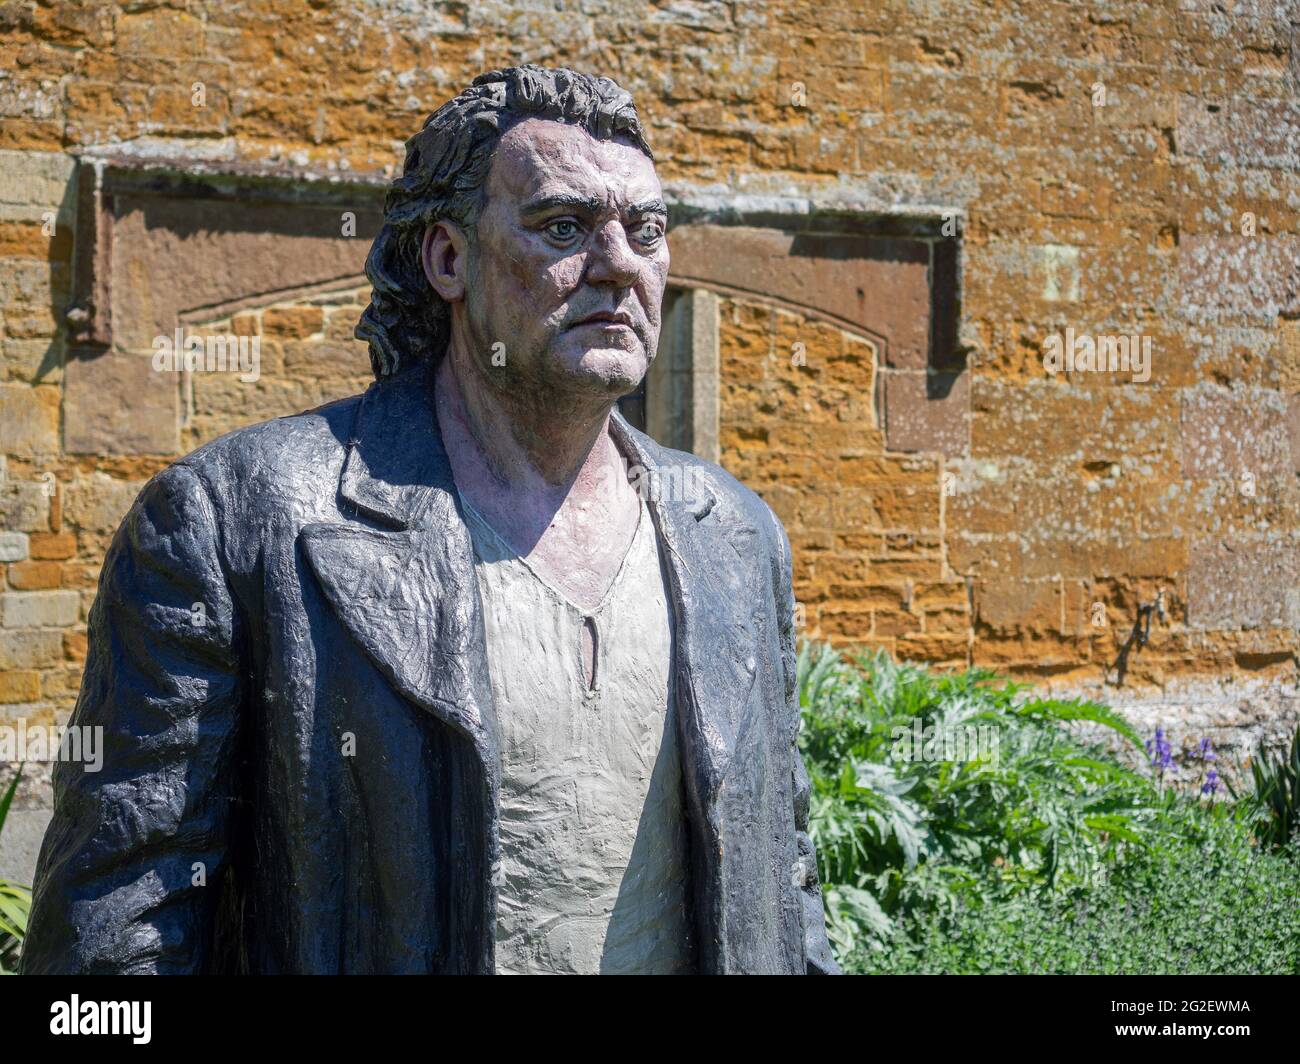 Lifesize sculpture of the opera singer Bryn Terfel, as Wotan from the Ring Cycle, outside Nevill Holt Opera, Leicestershire, UK Stock Photo